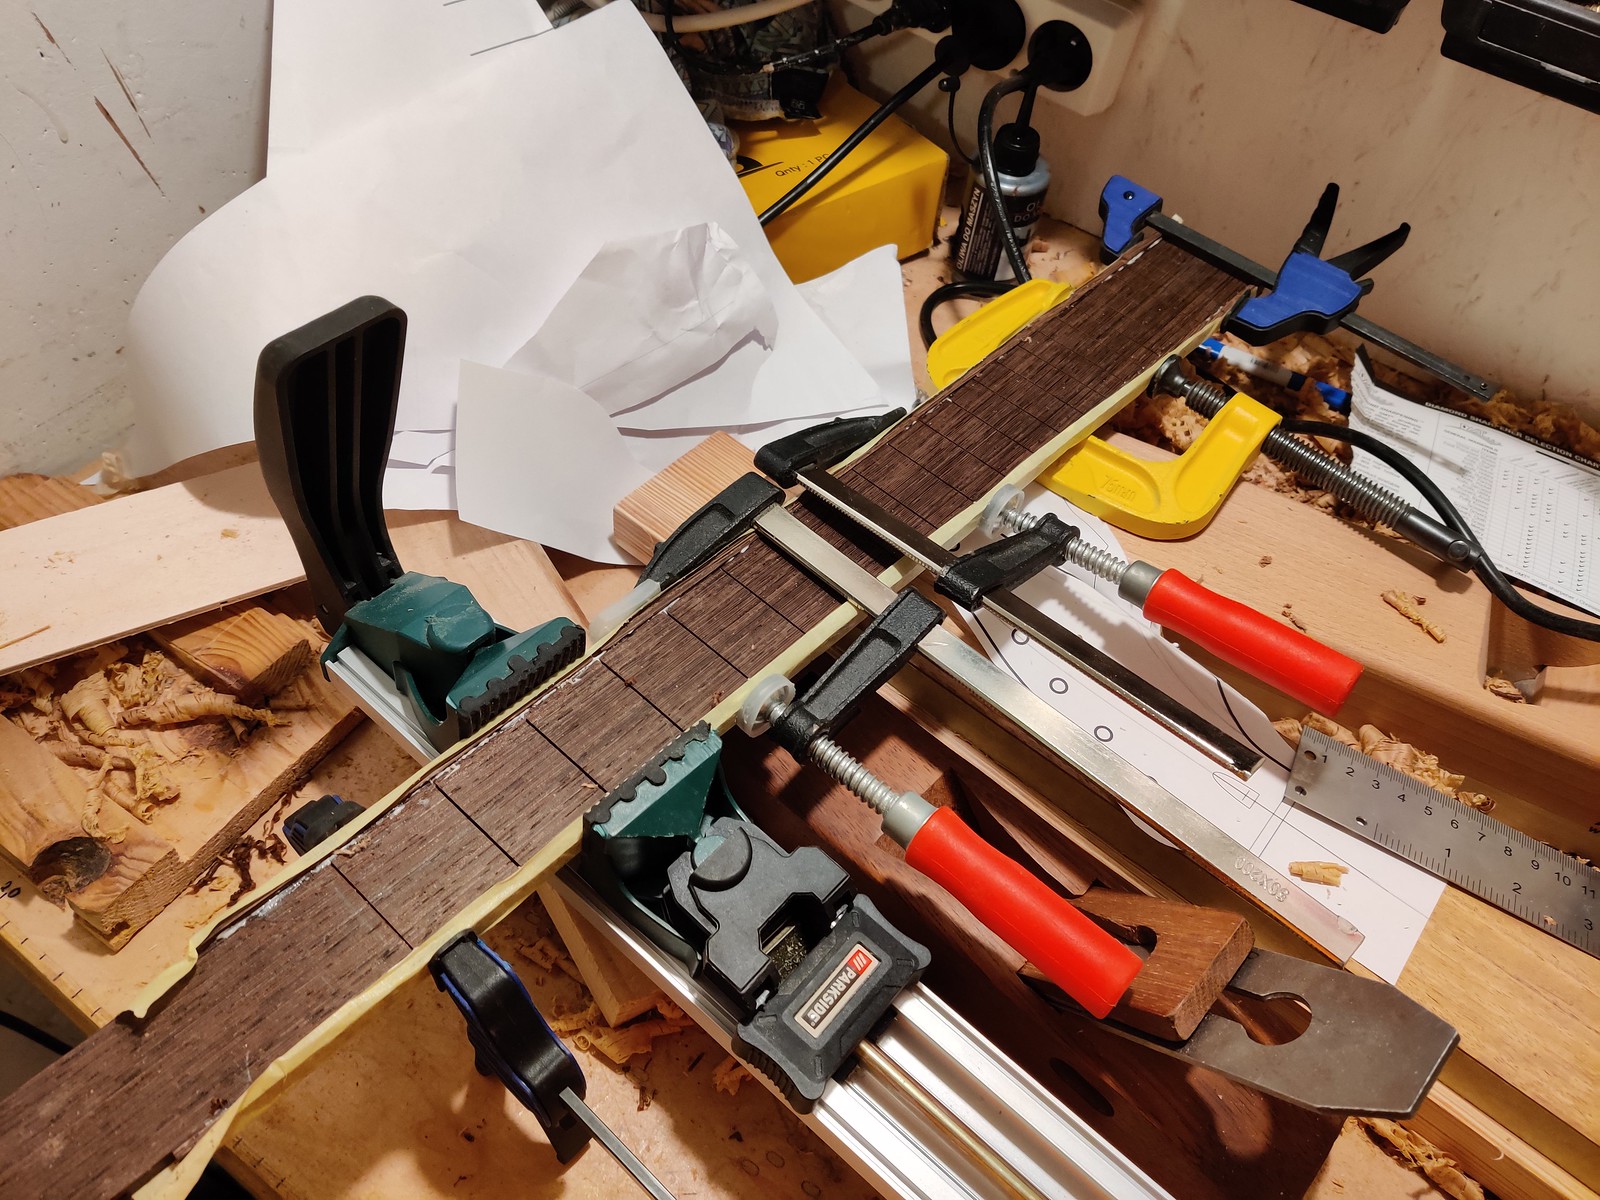 A wenge fretboard in a lot of clamps